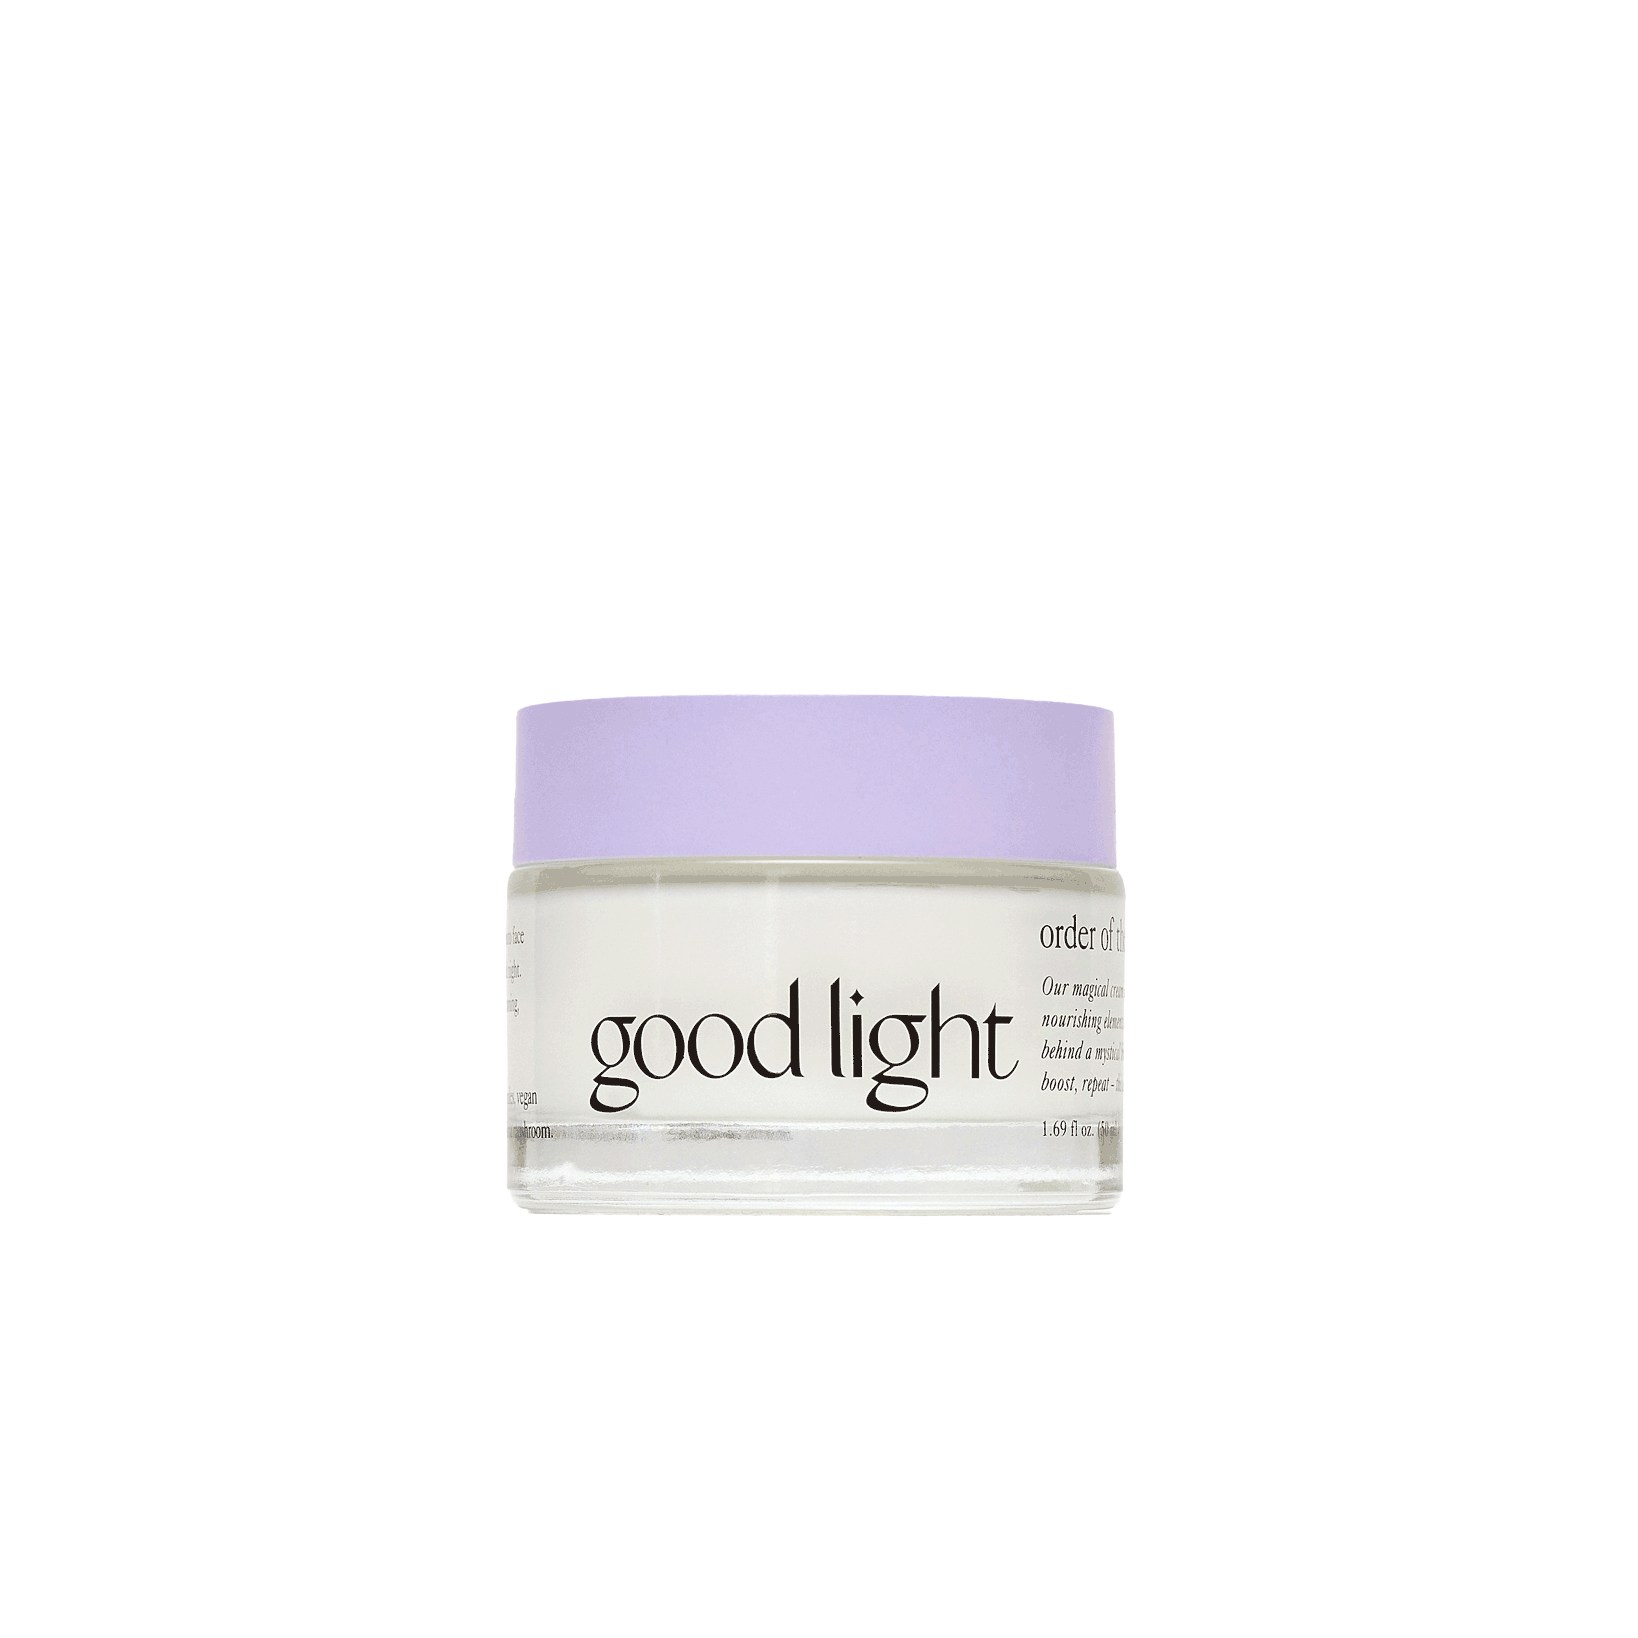 order of the eclipse hyaluronic cream